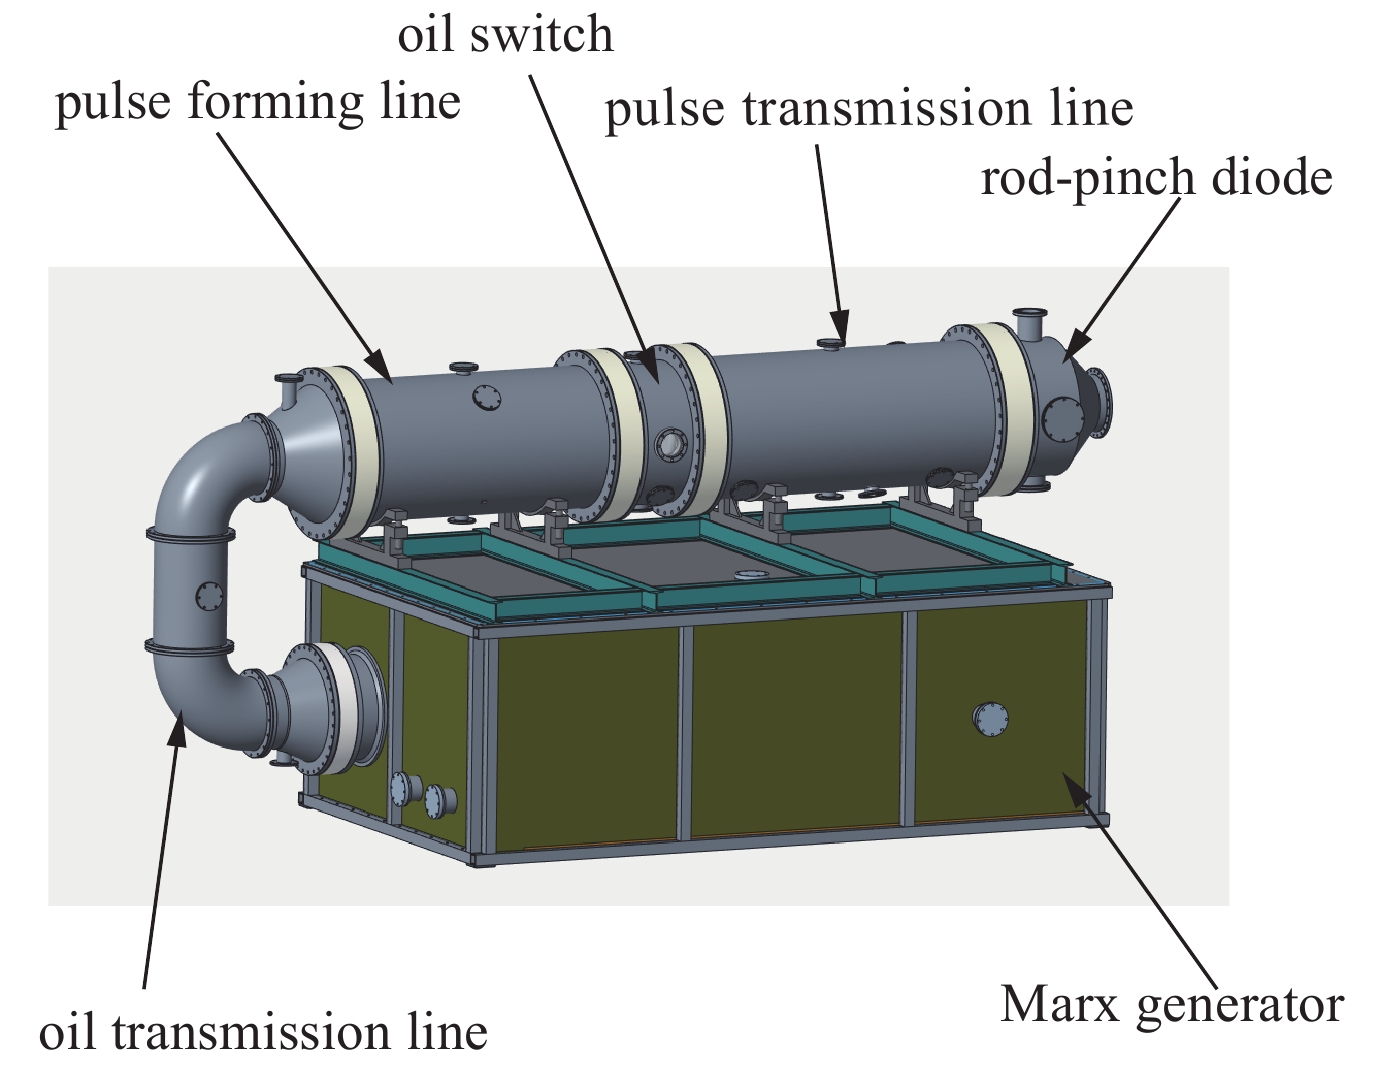 Schematic illustration of the 1 MV X-ray system